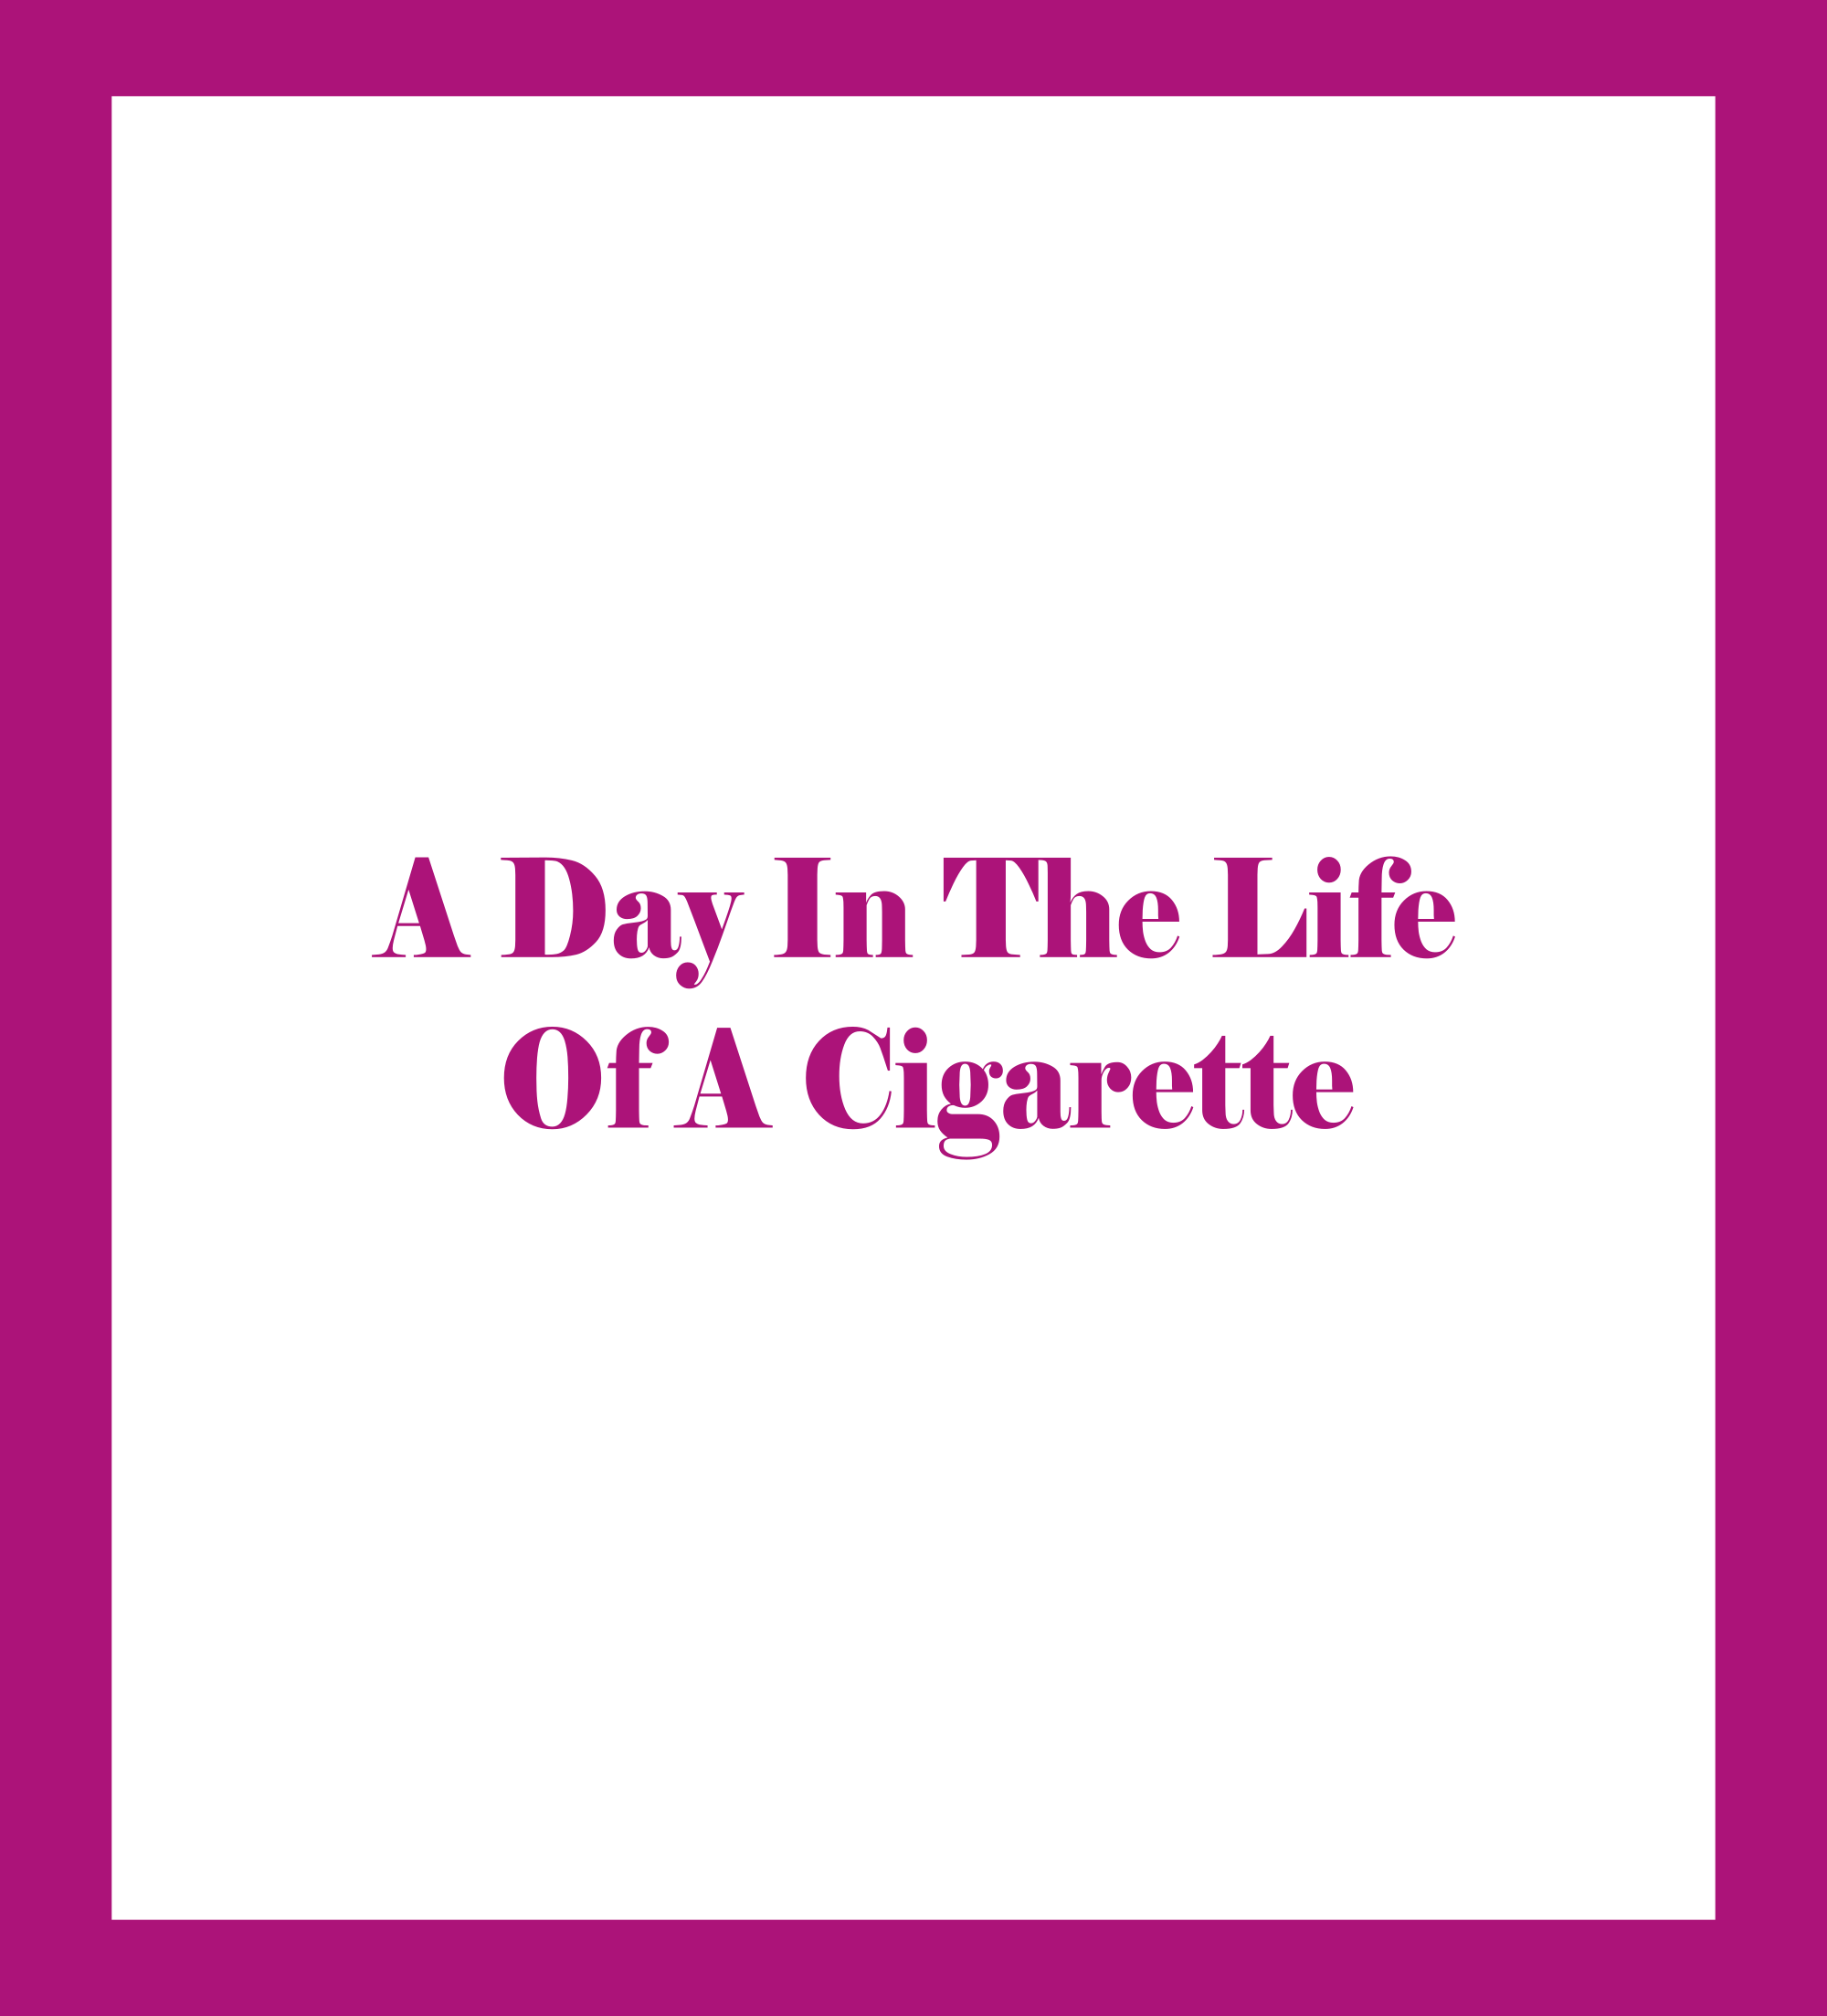 A Day In The Life Of A Cigarette